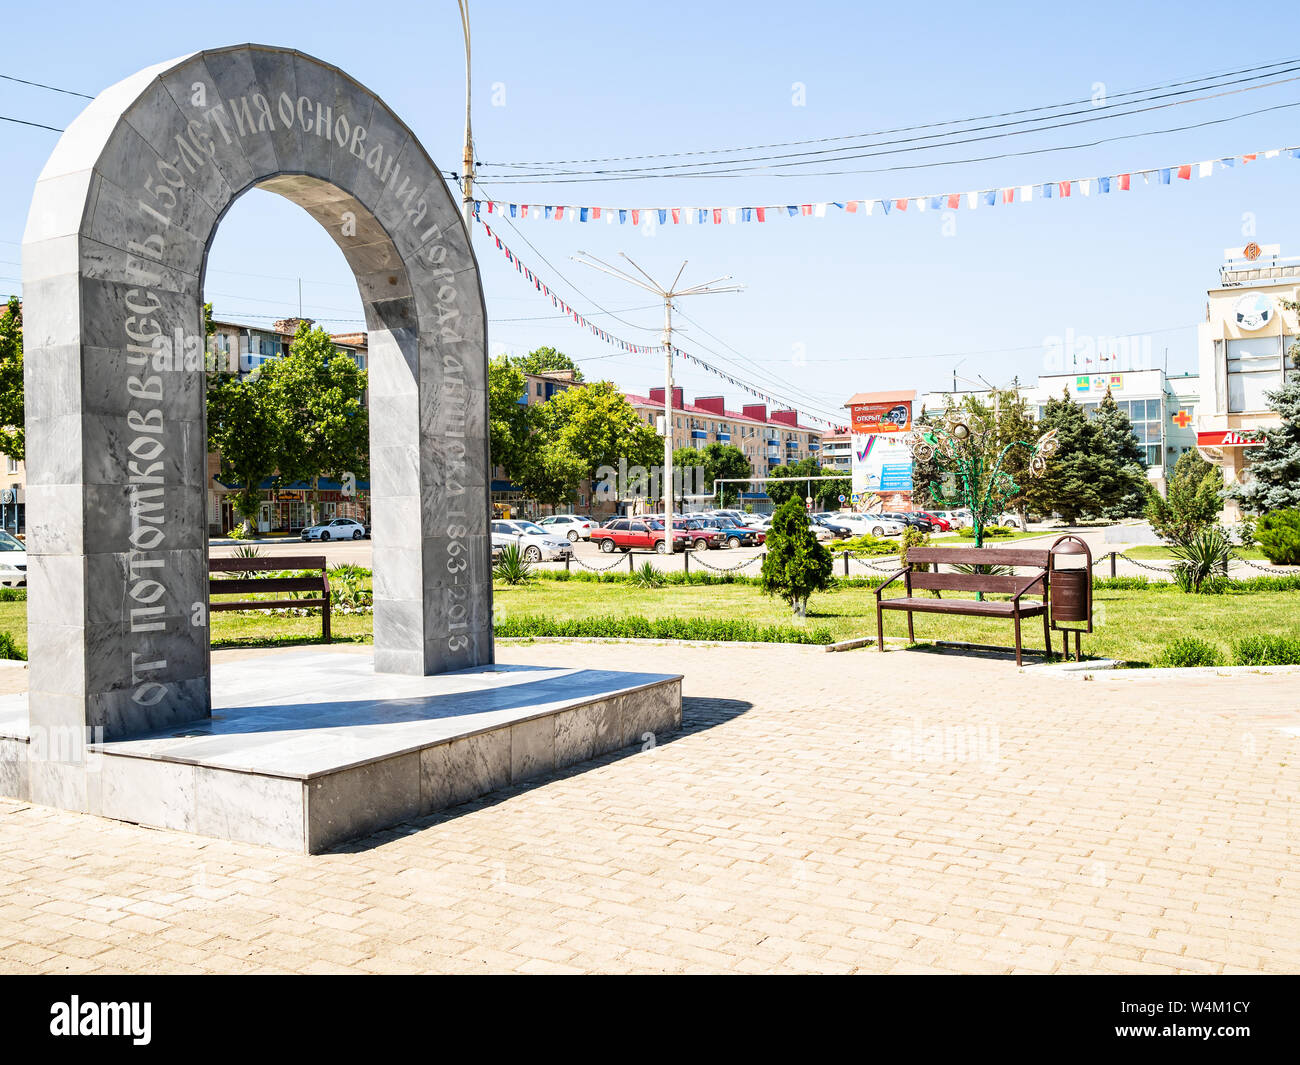 ABINSK, RUSSIA - JULY 2, 2019: Memorial sign in honor of the 150th anniversary of the foundation of the Abinsk village settlement in memorial park on Stock Photo